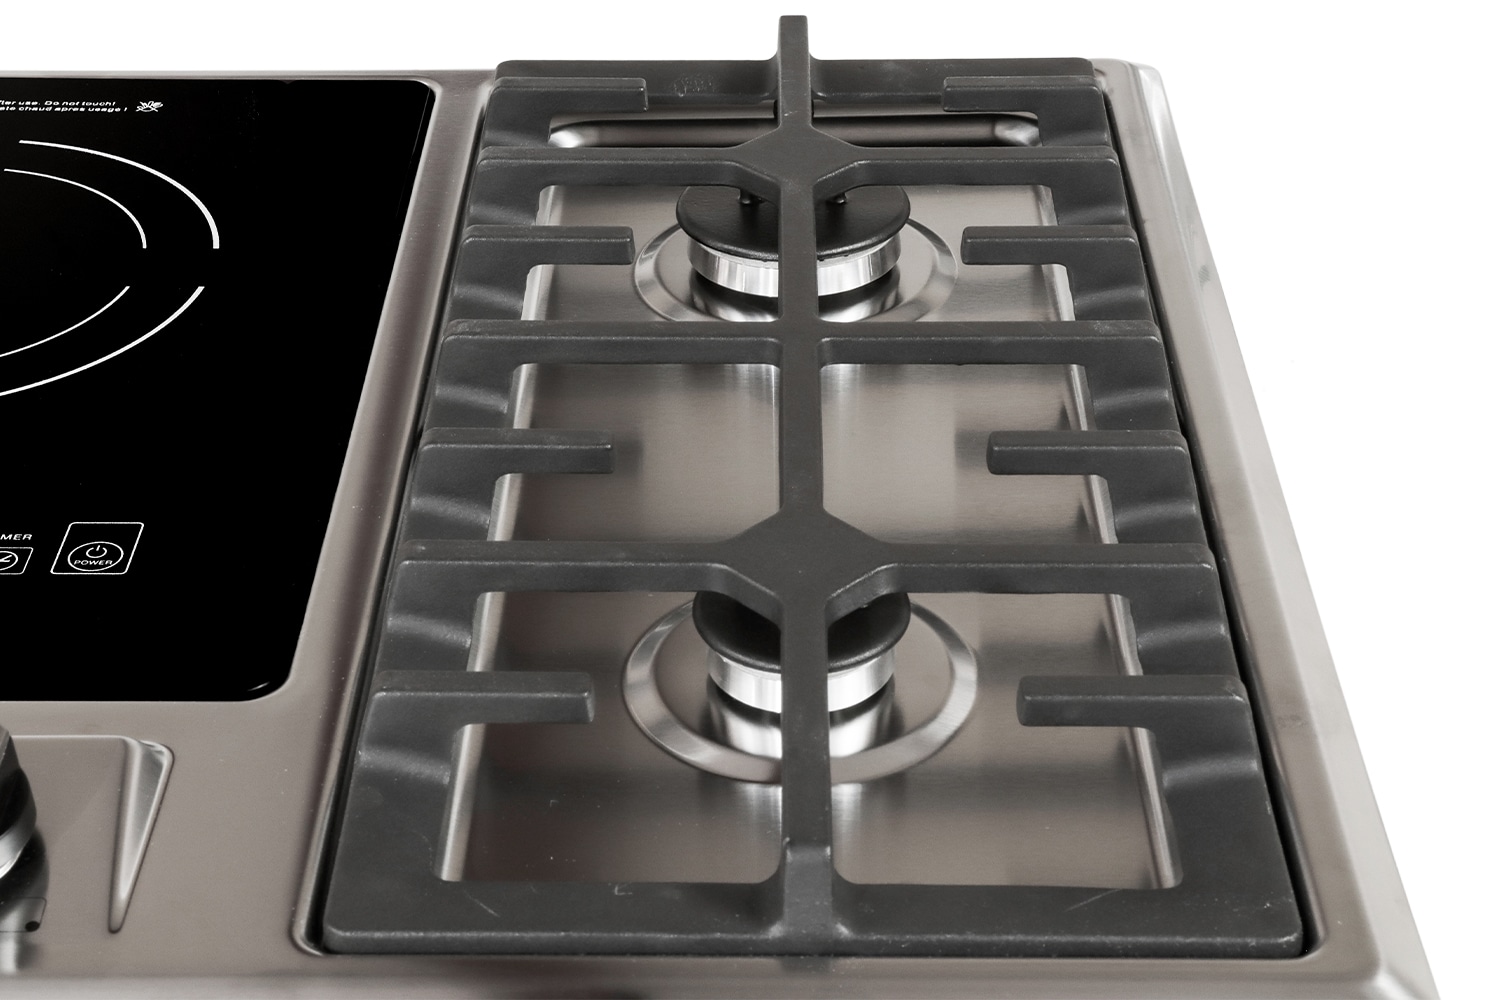 True Induction 858UL Certified 15-in 2 Elements Black Induction Cooktop in  the Induction Cooktops department at